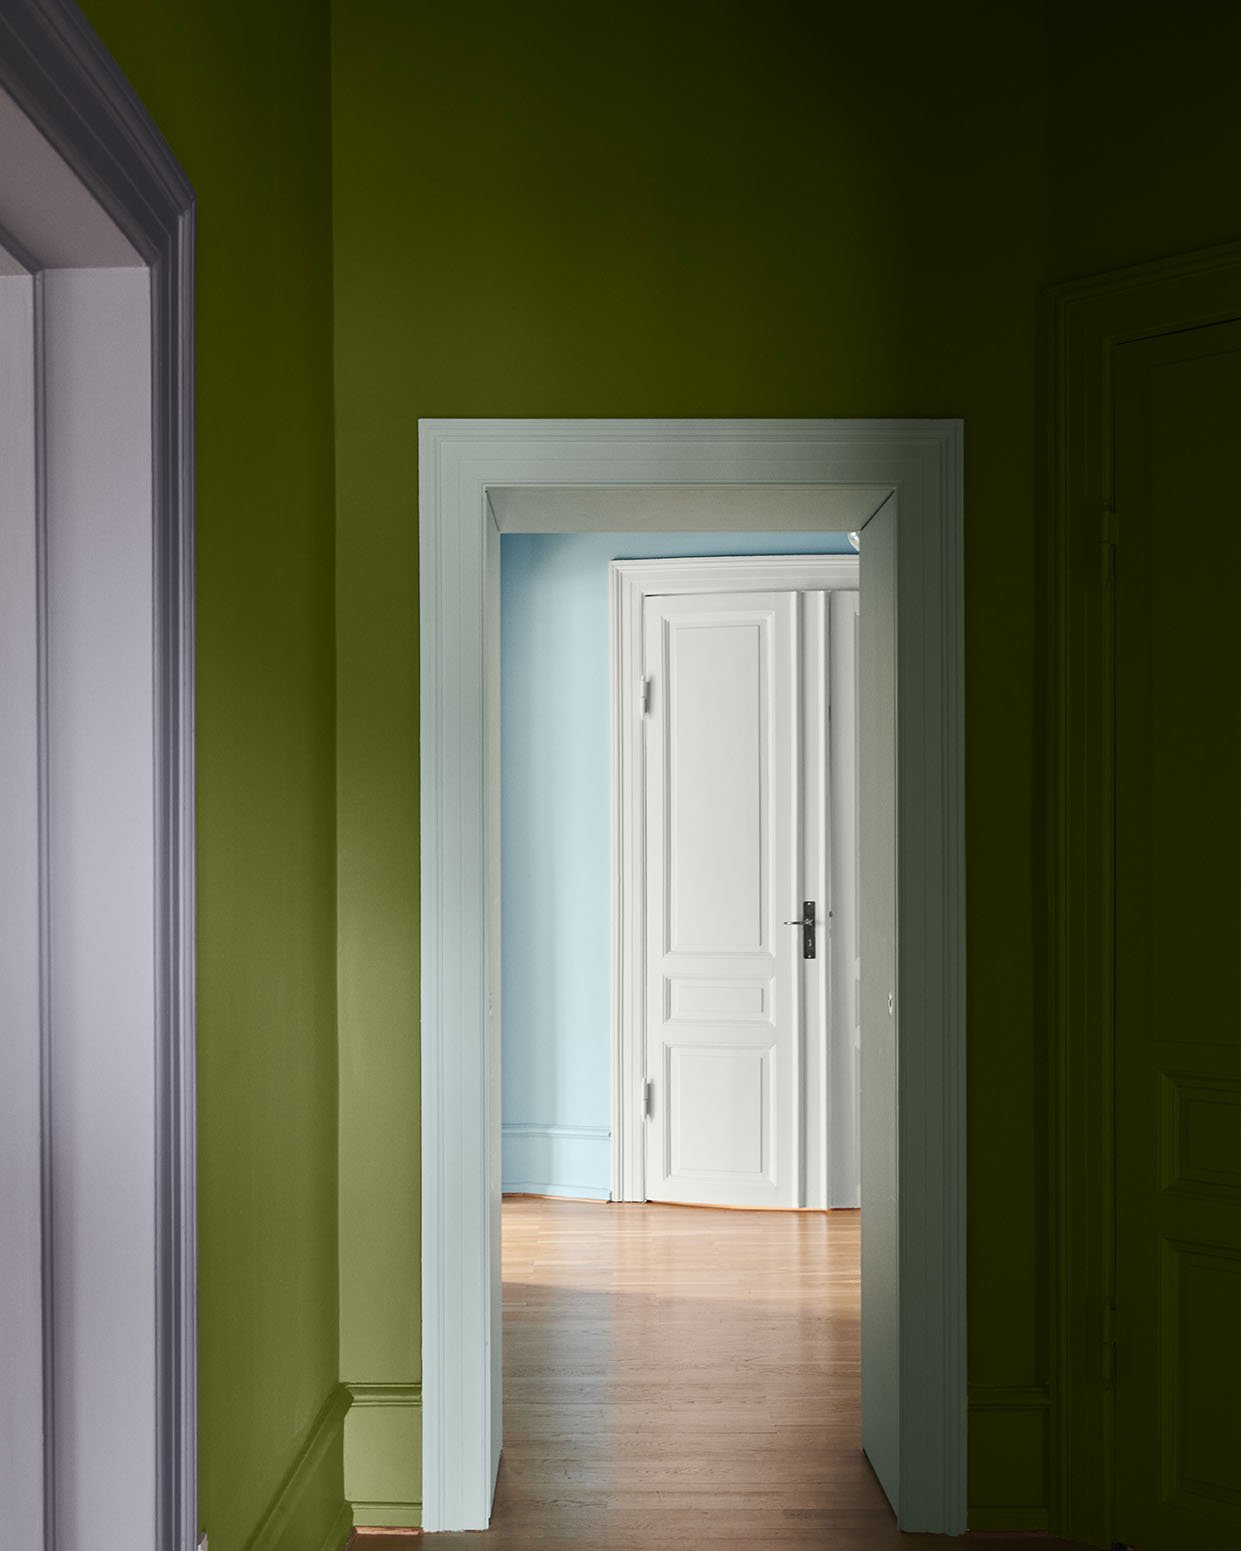 Walls and door painted with 'Sweet Peas'